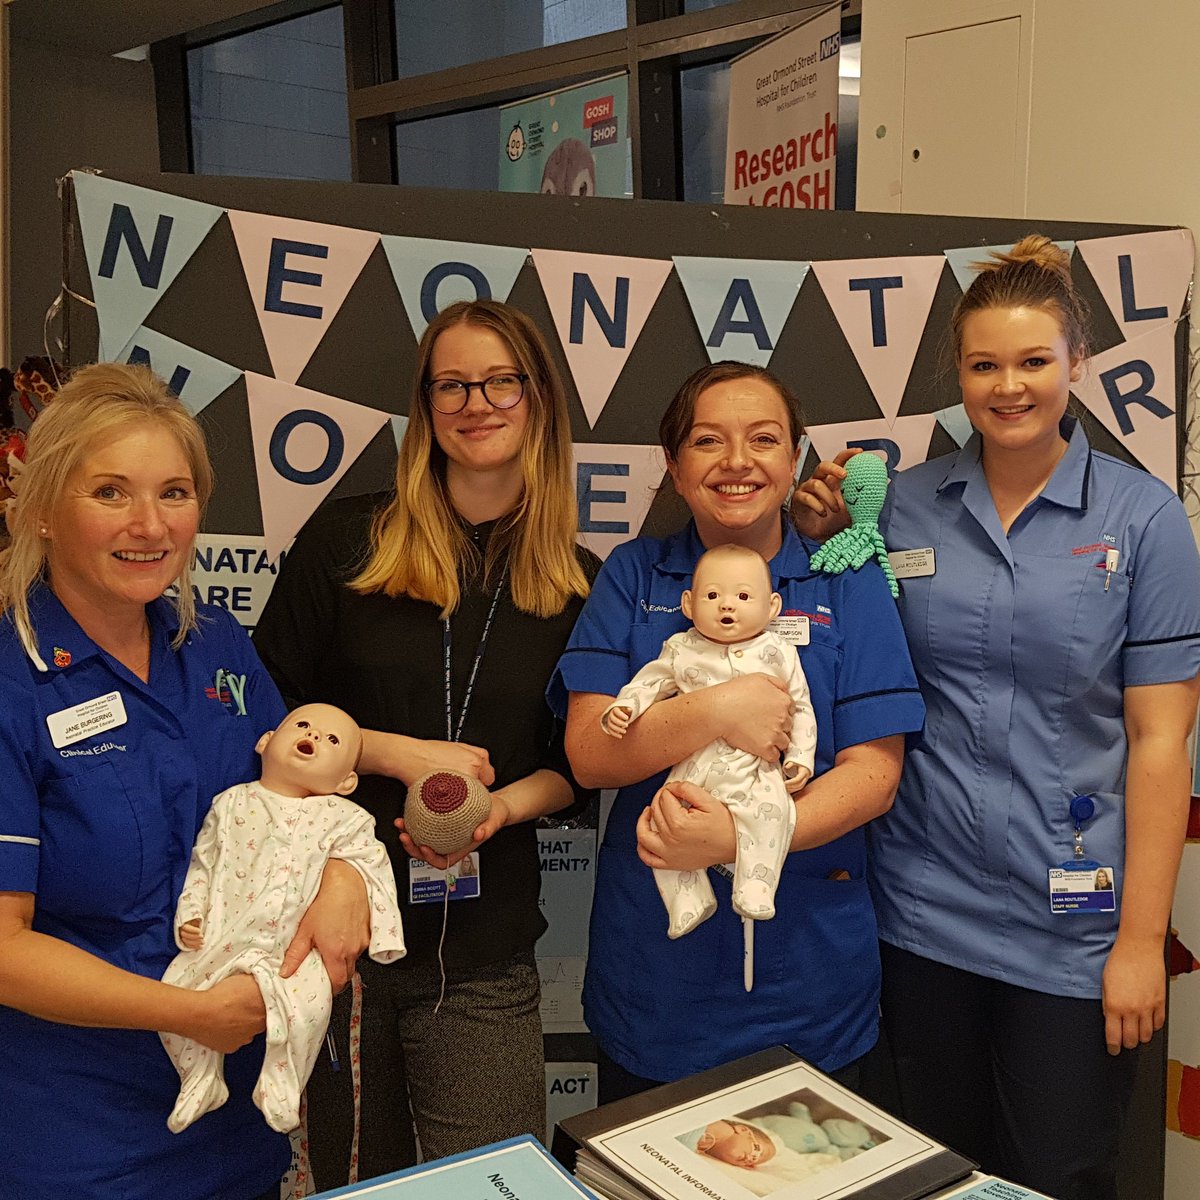 Amazing work being showcased in the Lagoon today for #NeonatalNovember
Well done and thanks for all the info and advice- as Mummy to be it was really helpful!

#GOSH